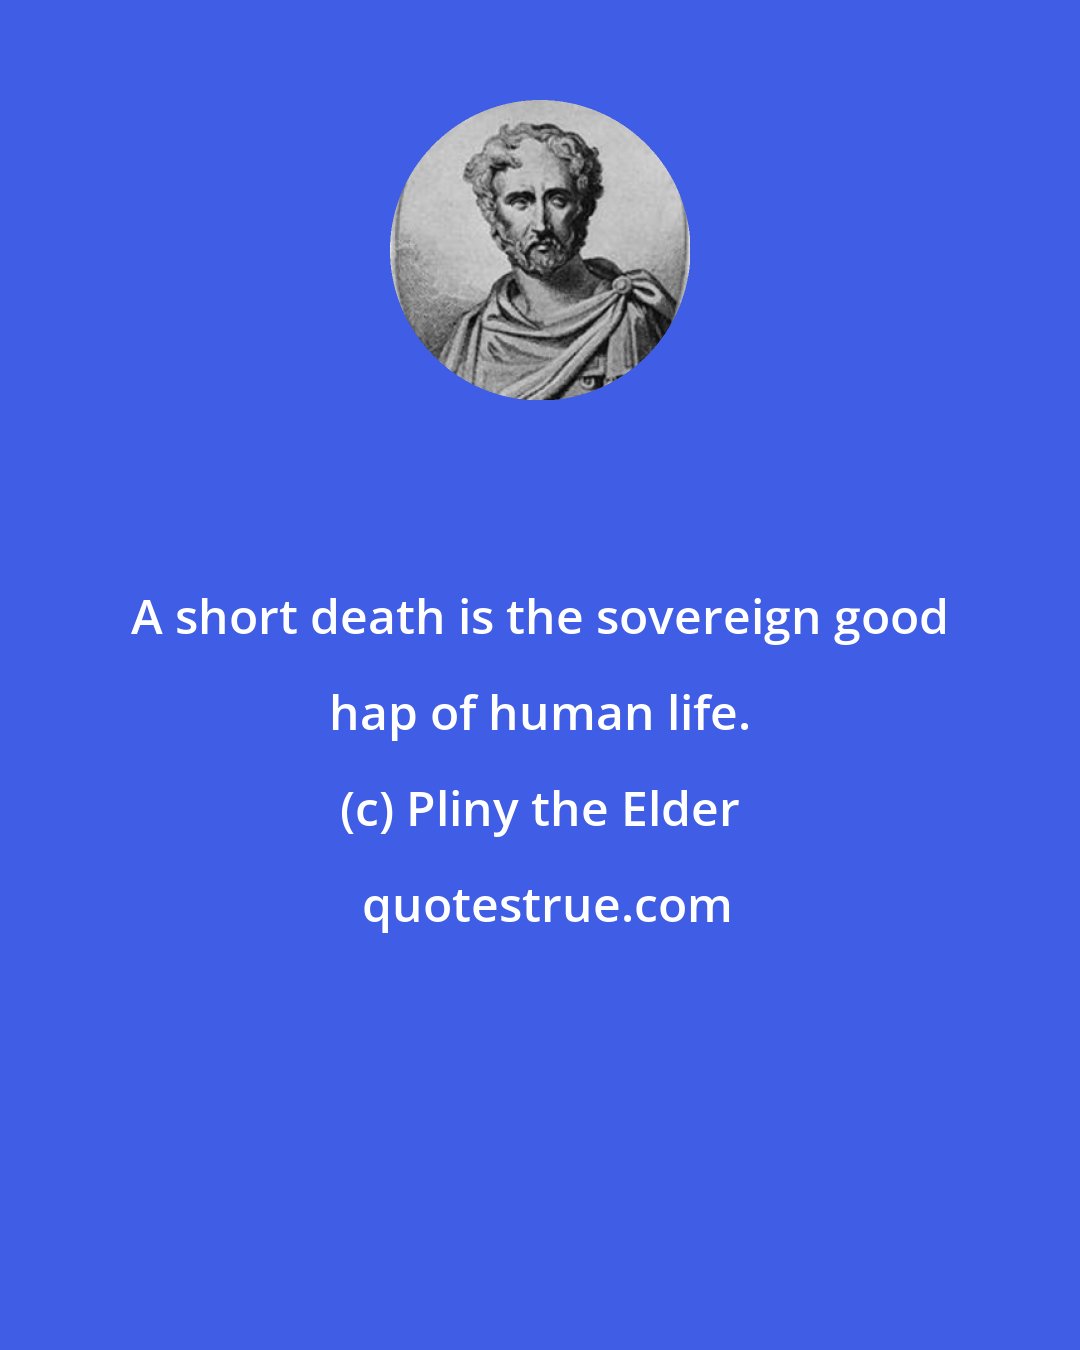 Pliny the Elder: A short death is the sovereign good hap of human life.